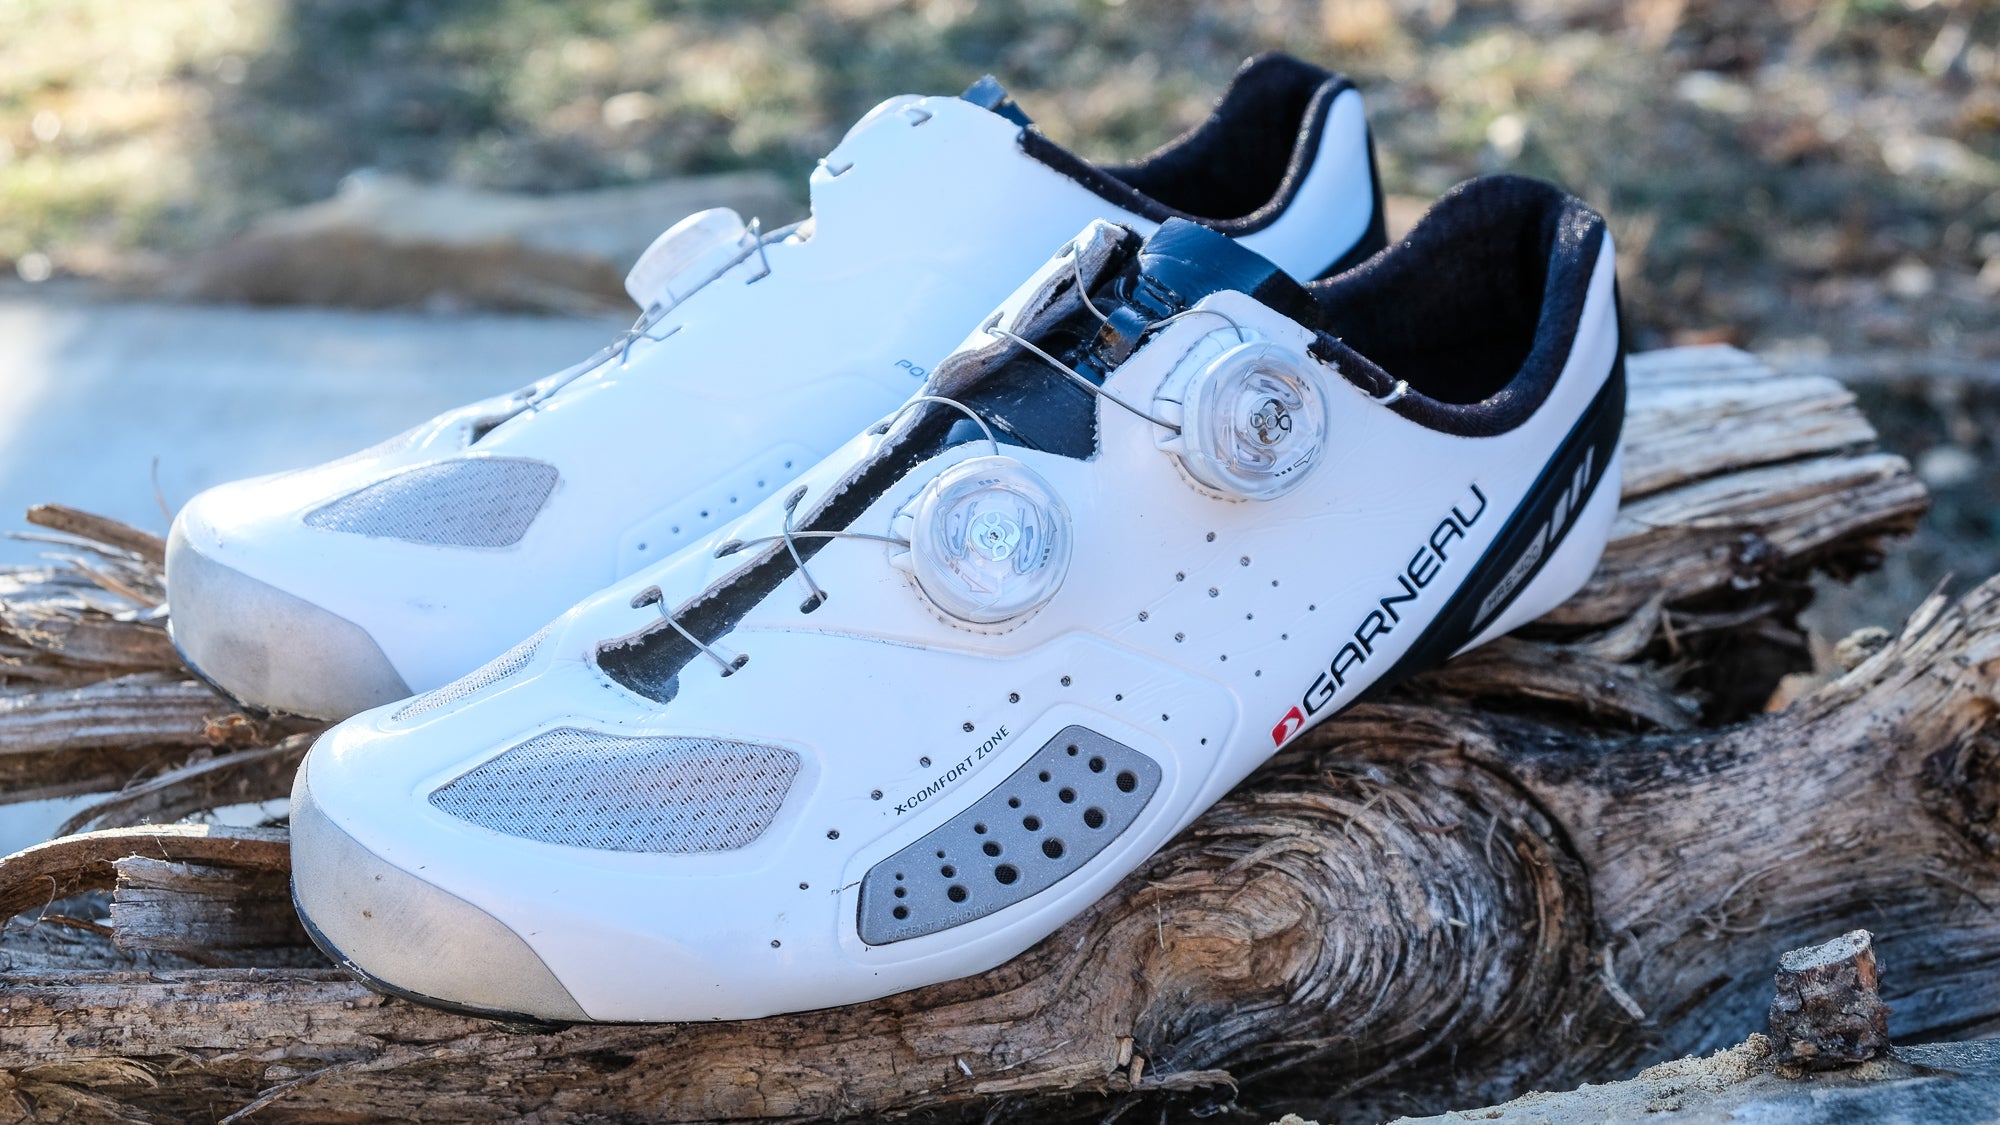 Louis Garneau Gravel Touring/Indoor Cycling Shoes